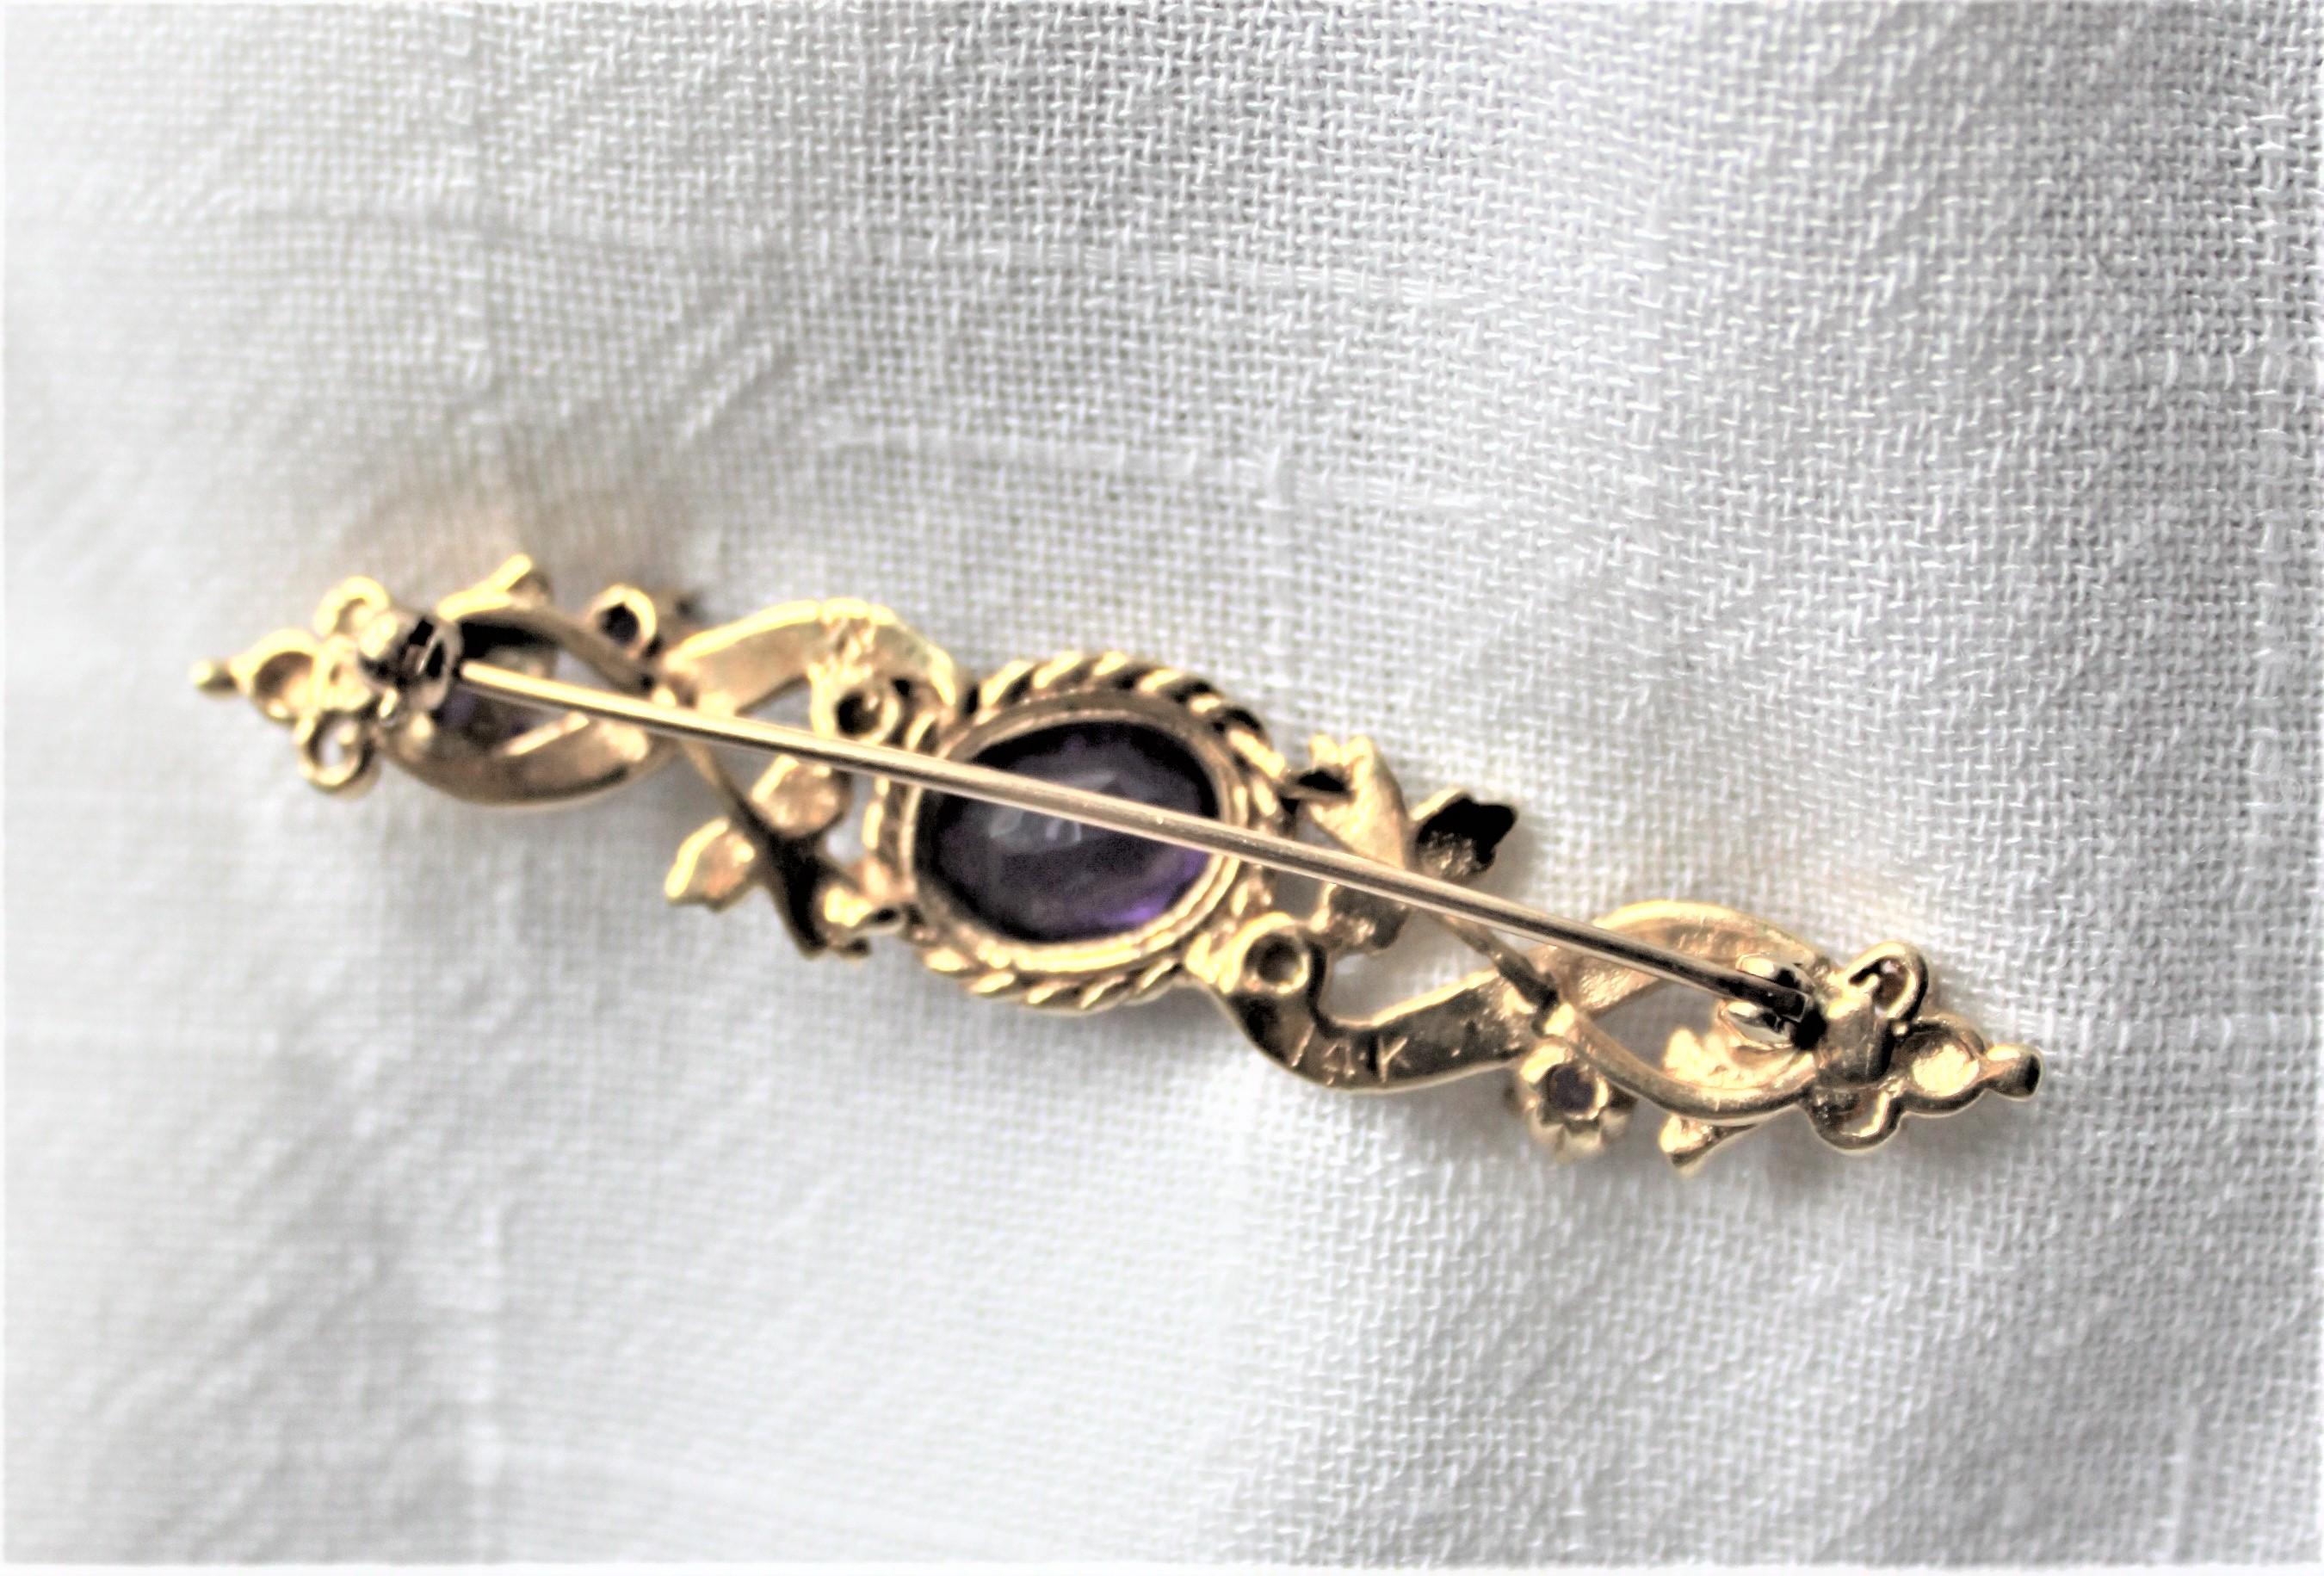 Antique 14-Karat Yellow Gold, Amethyst and Seed Pearl Necklace and Brooch In Good Condition For Sale In Hamilton, Ontario